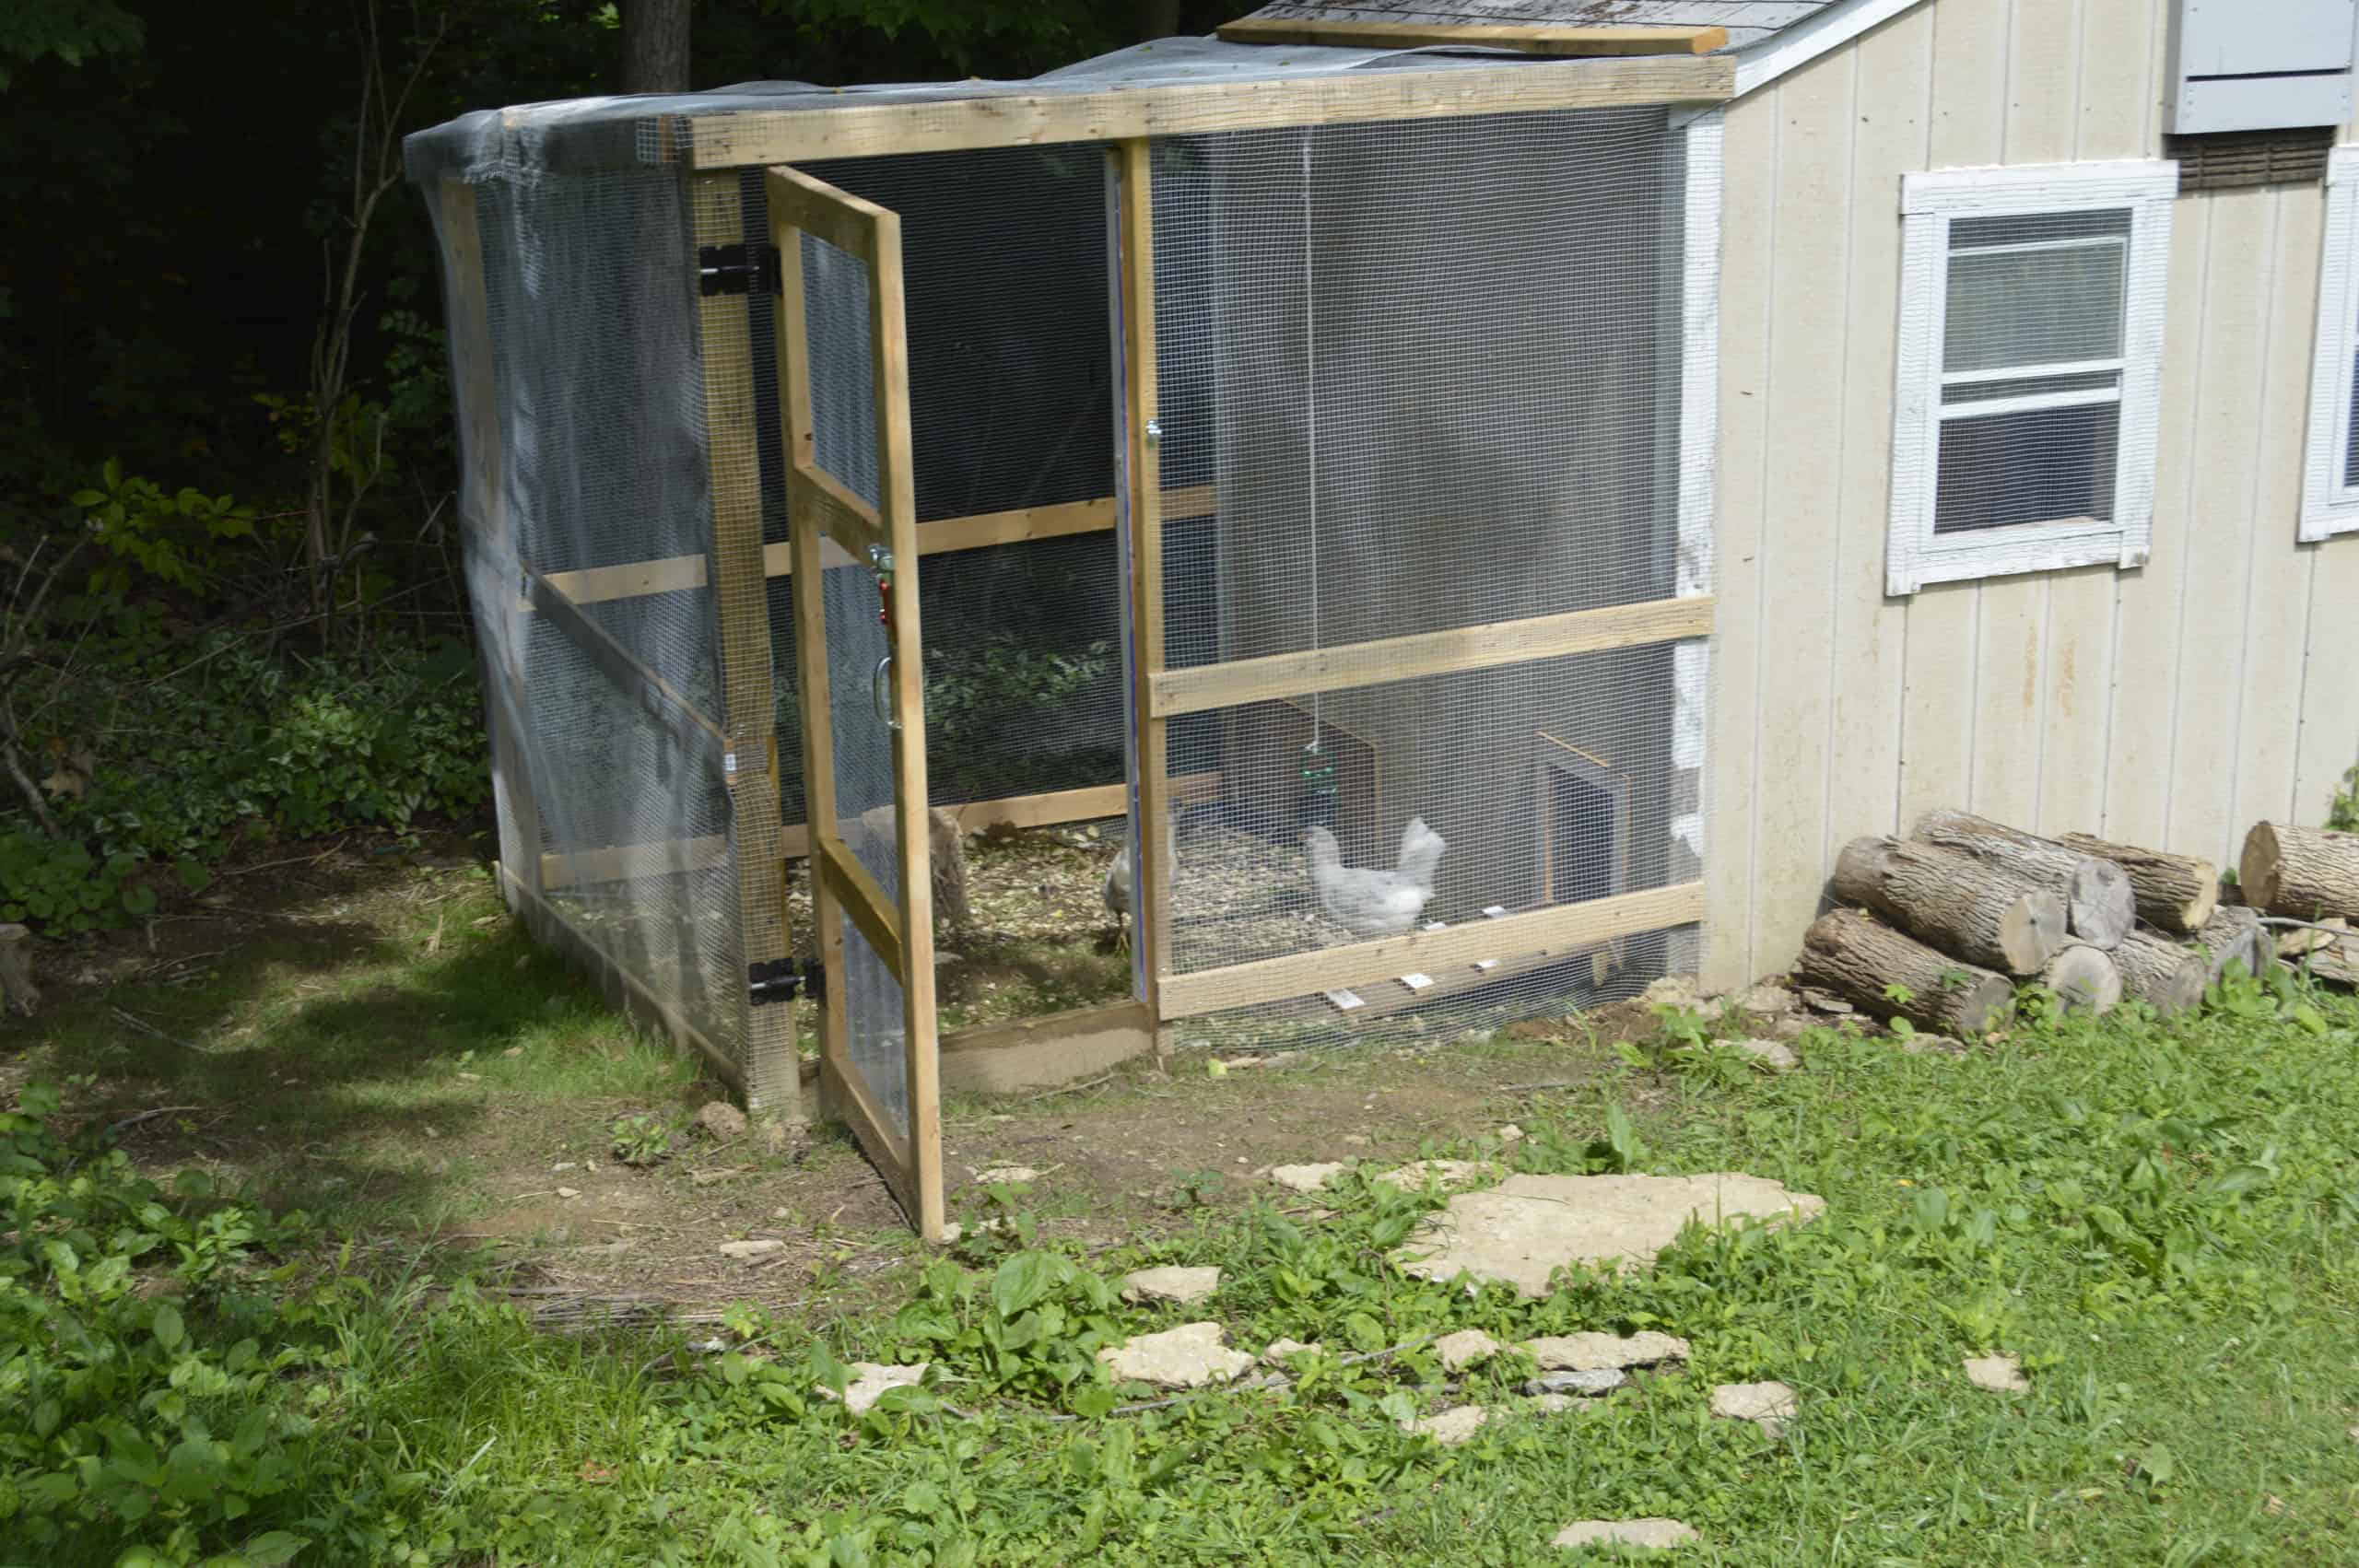 Our original chicken coop that was a shed, turned coop with a chicken run that we added on, run door open with 2 white chickens inside.